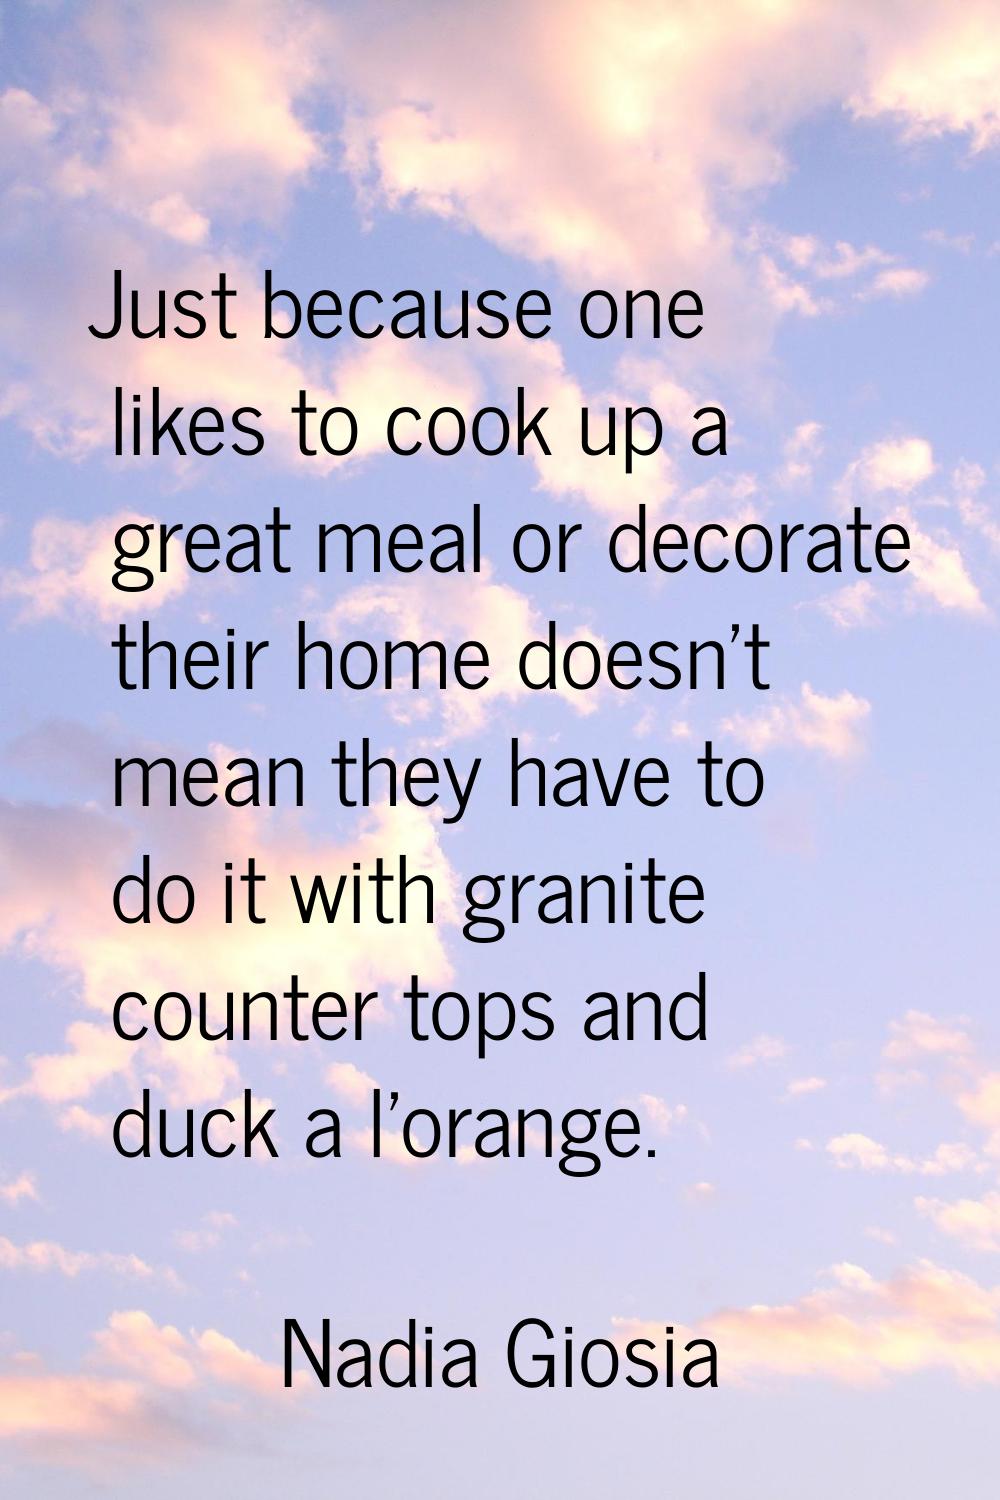 Just because one likes to cook up a great meal or decorate their home doesn't mean they have to do 